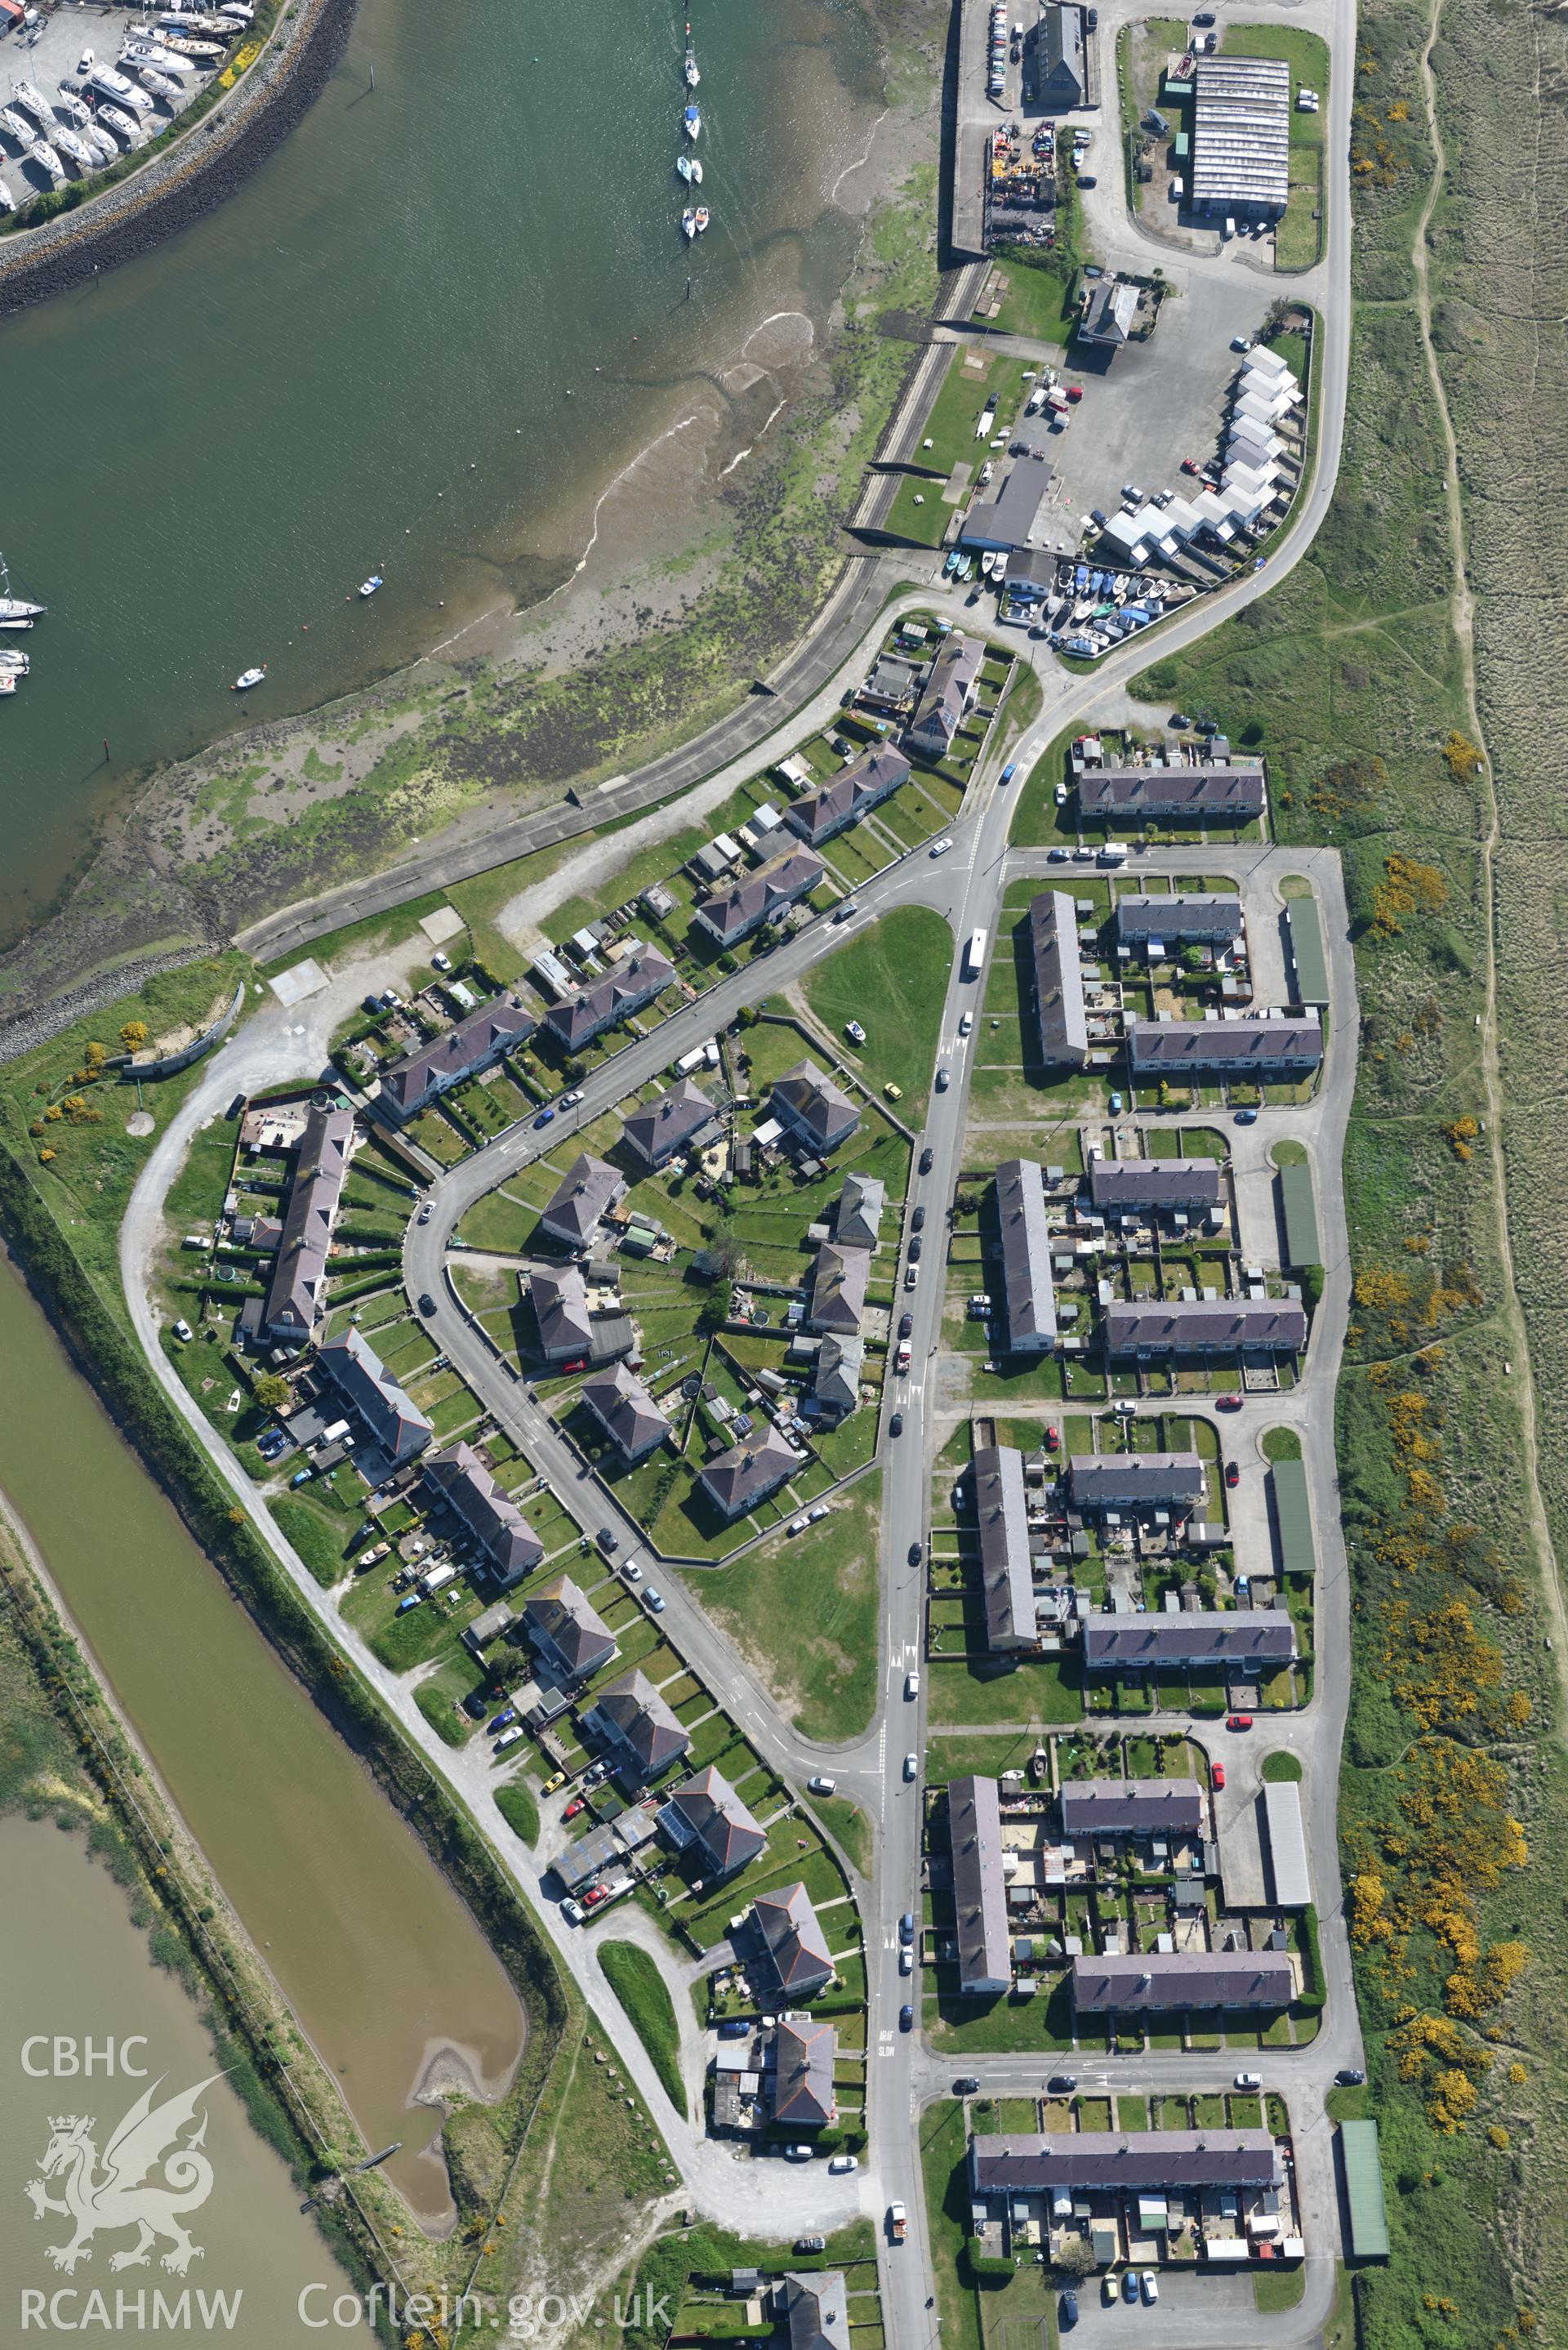 Aerial photography of Pwllheli Harbour taken on 3rd May 2017.  Baseline aerial reconnaissance survey for the CHERISH Project. ? Crown: CHERISH PROJECT 2017. Produced with EU funds through the Ireland Wales Co-operation Programme 2014-2020. All material made freely available through the Open Government Licence.